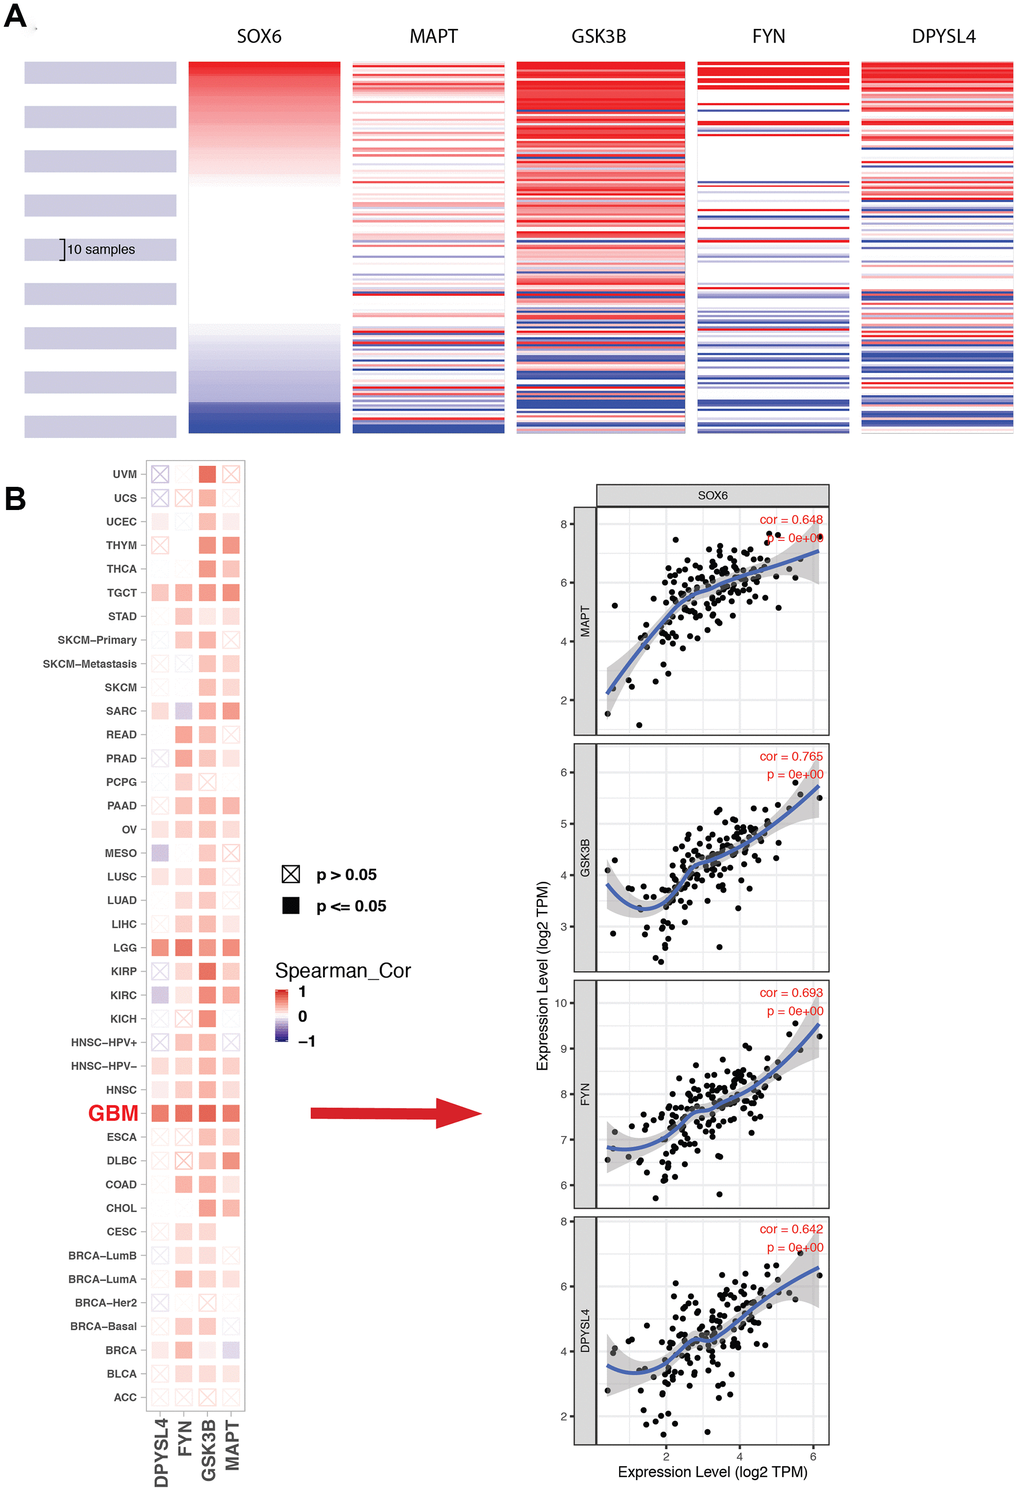 Expression of SOX6 and hub genes. (A) The hierarchical clustering of hub genes was generated by the UCSC online database. (B) The correlation between SOX6 and DPYSL4 (or FYN, or GSK3B, or MAPT) in different tumors, the correlation of co-expression in GBM was shown on the right by TIMER online browser.